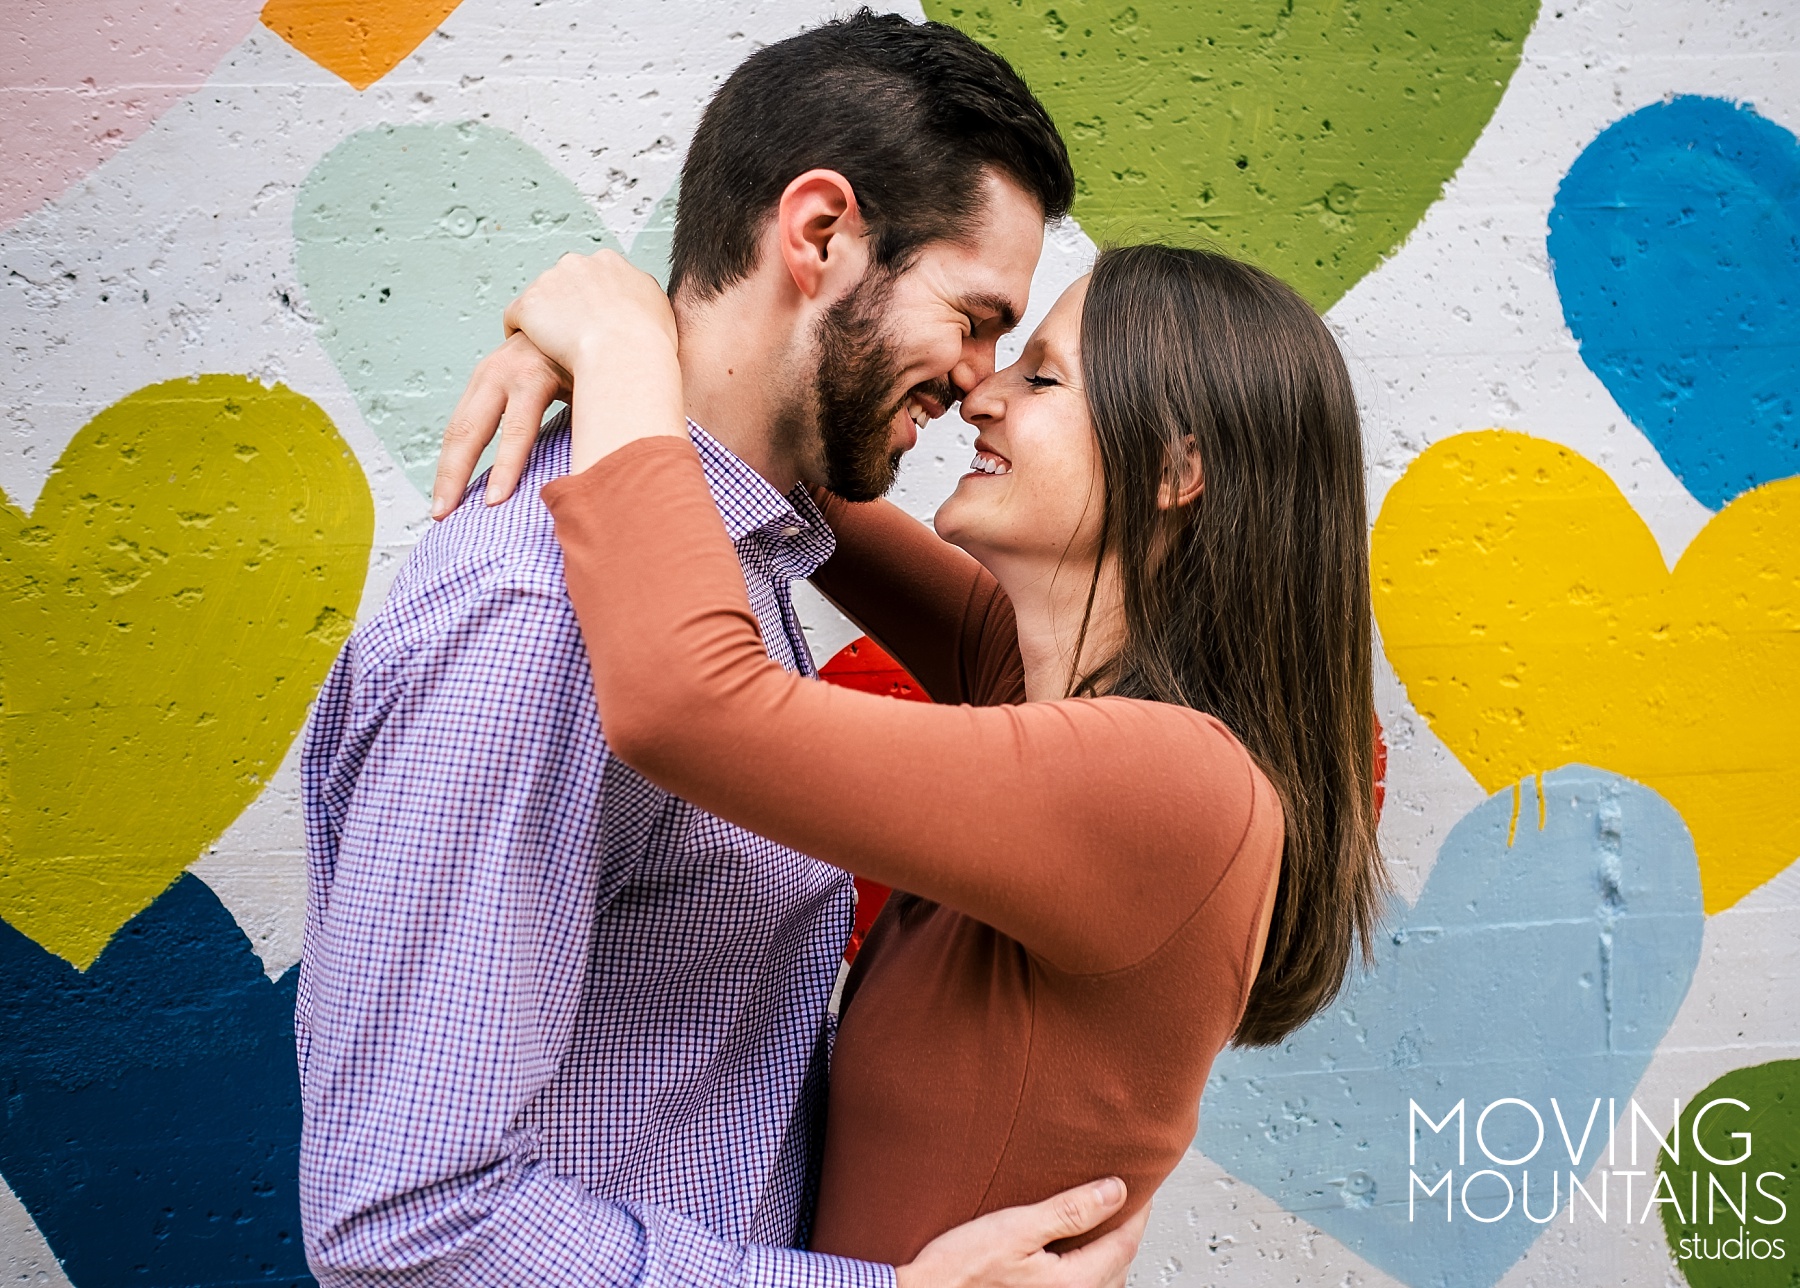 Crystal and Dylan embrace in front of the colorful heart wall in uptown charlotte